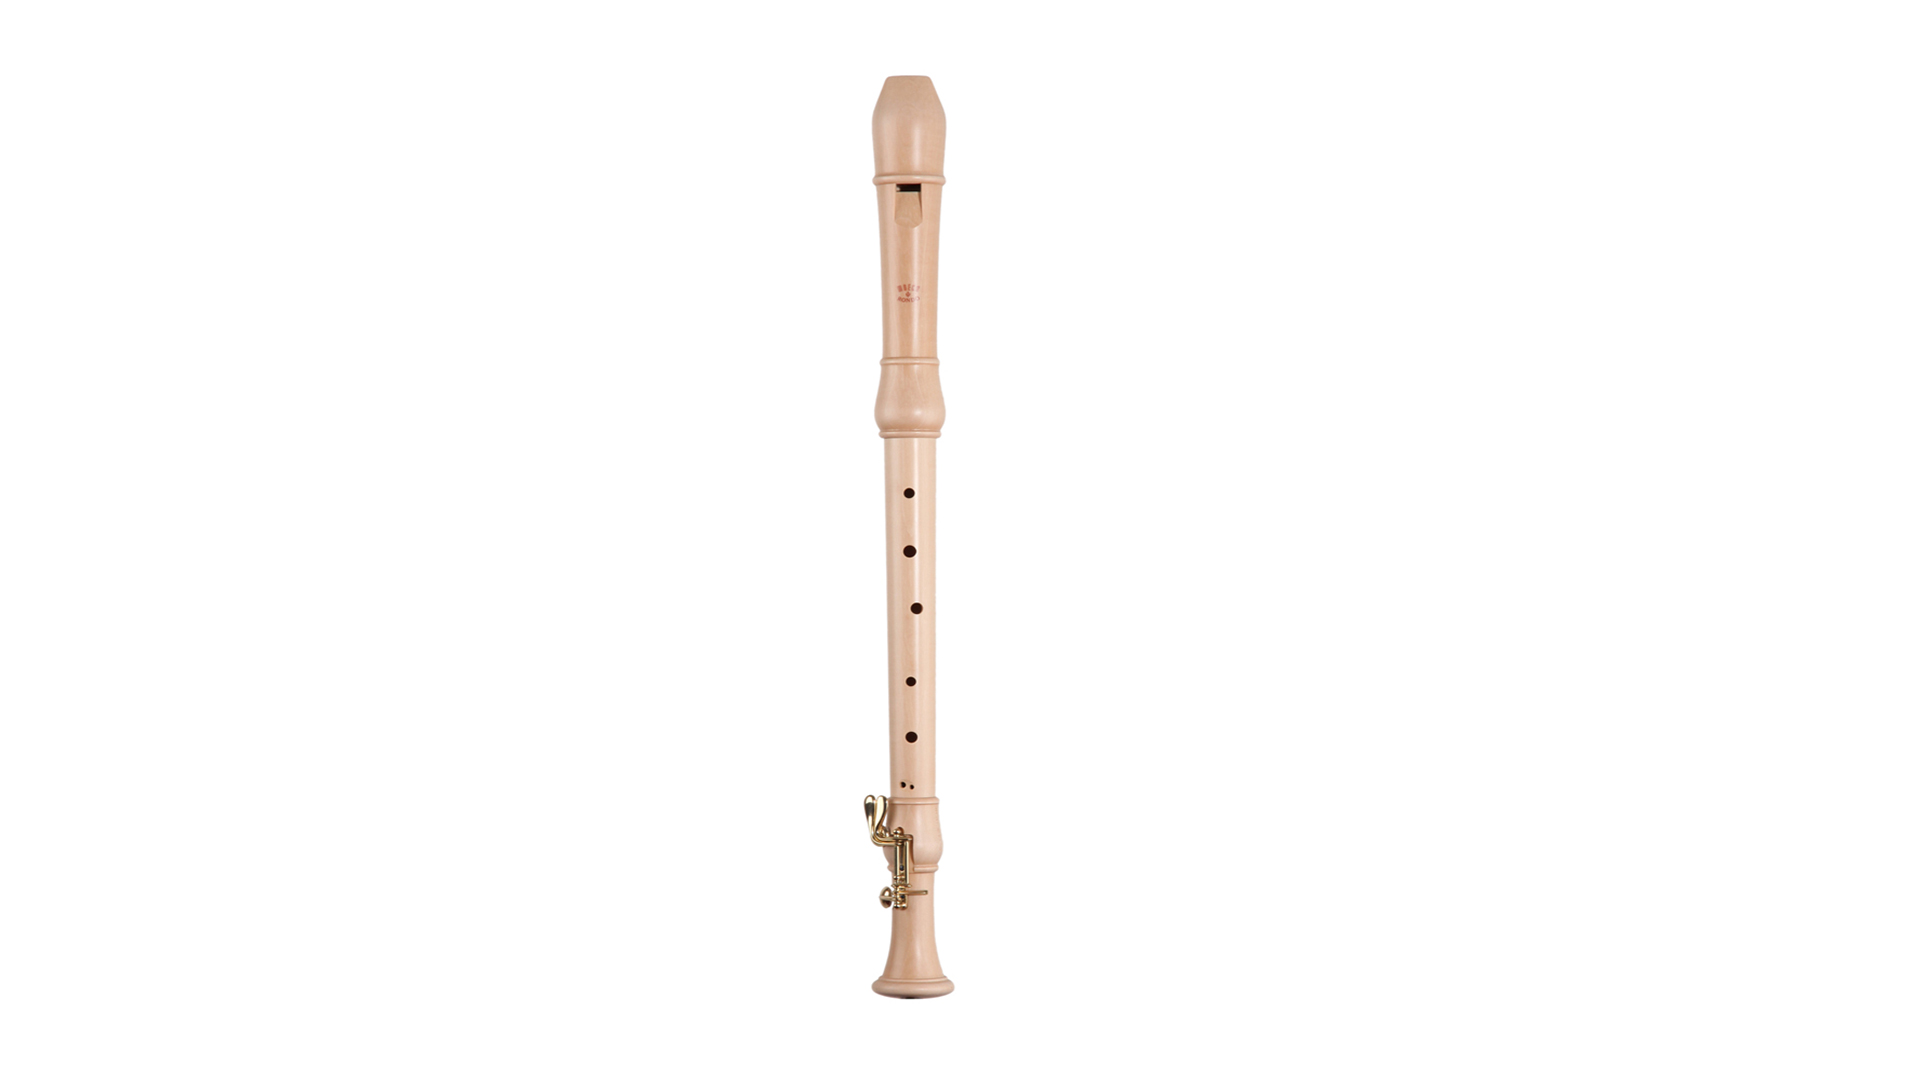 Moeck, "Flauto Rondo", tenor in c', baroque double hole, with double key, maple